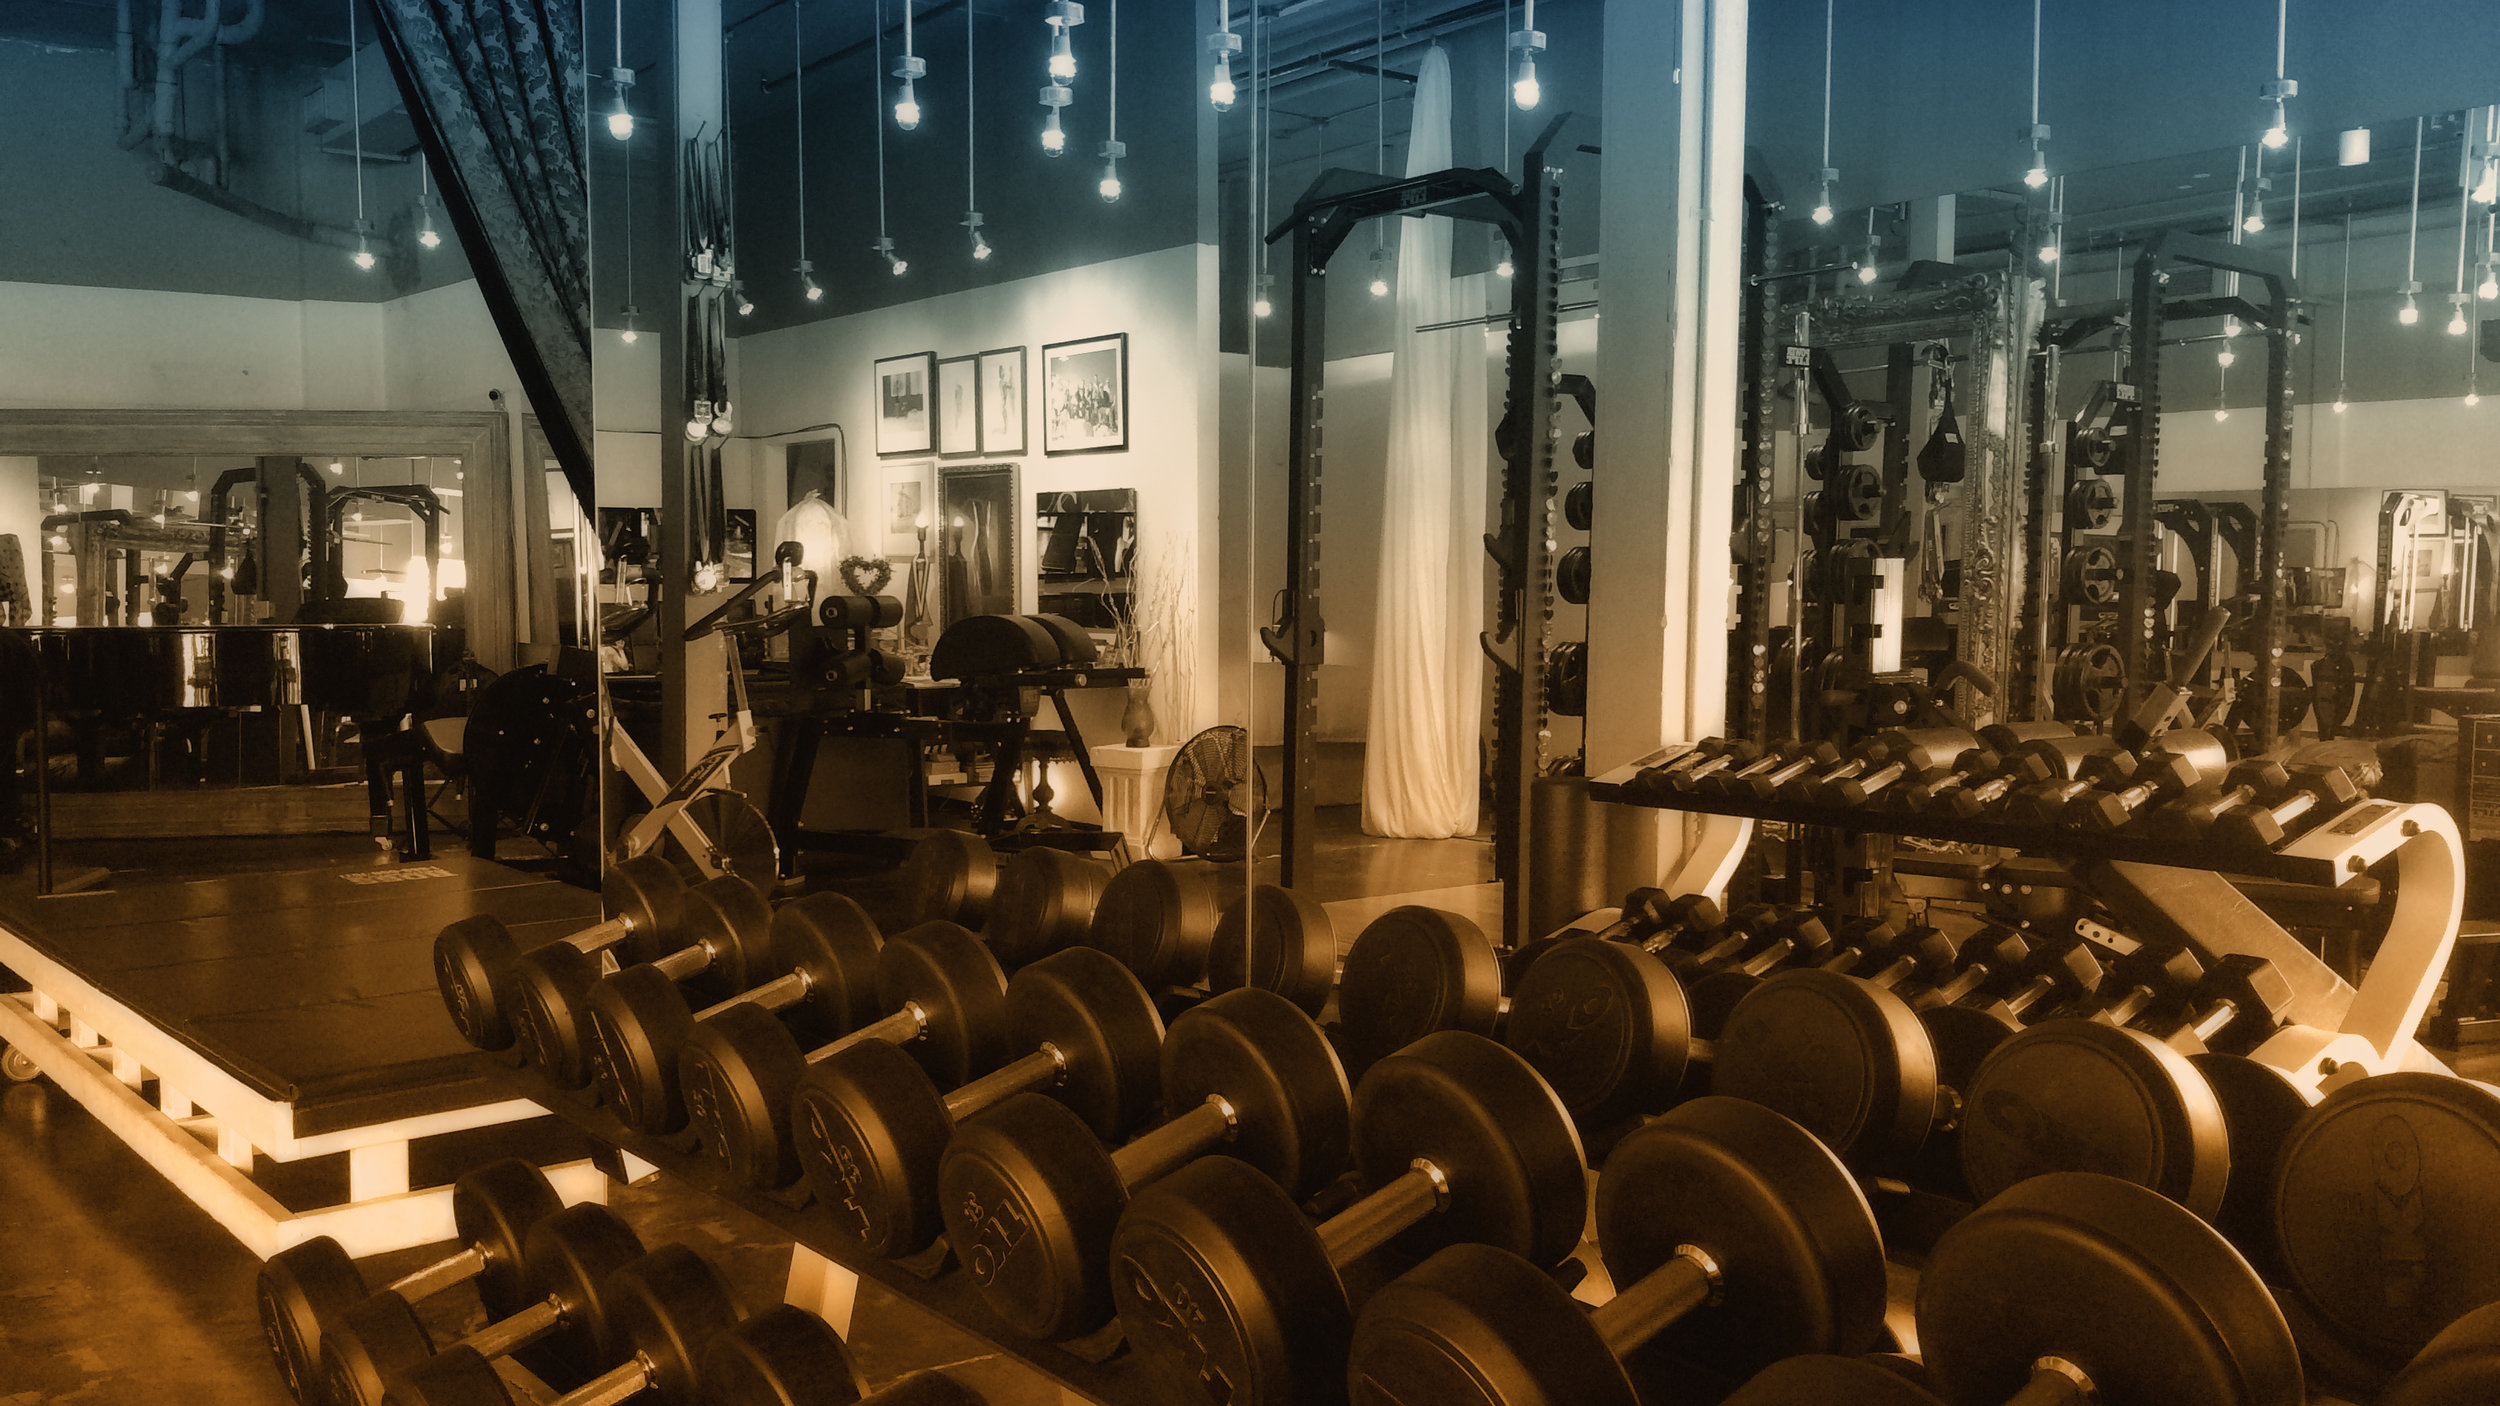 GymStudio, Private Personal Training Gym in Dallas, Texas